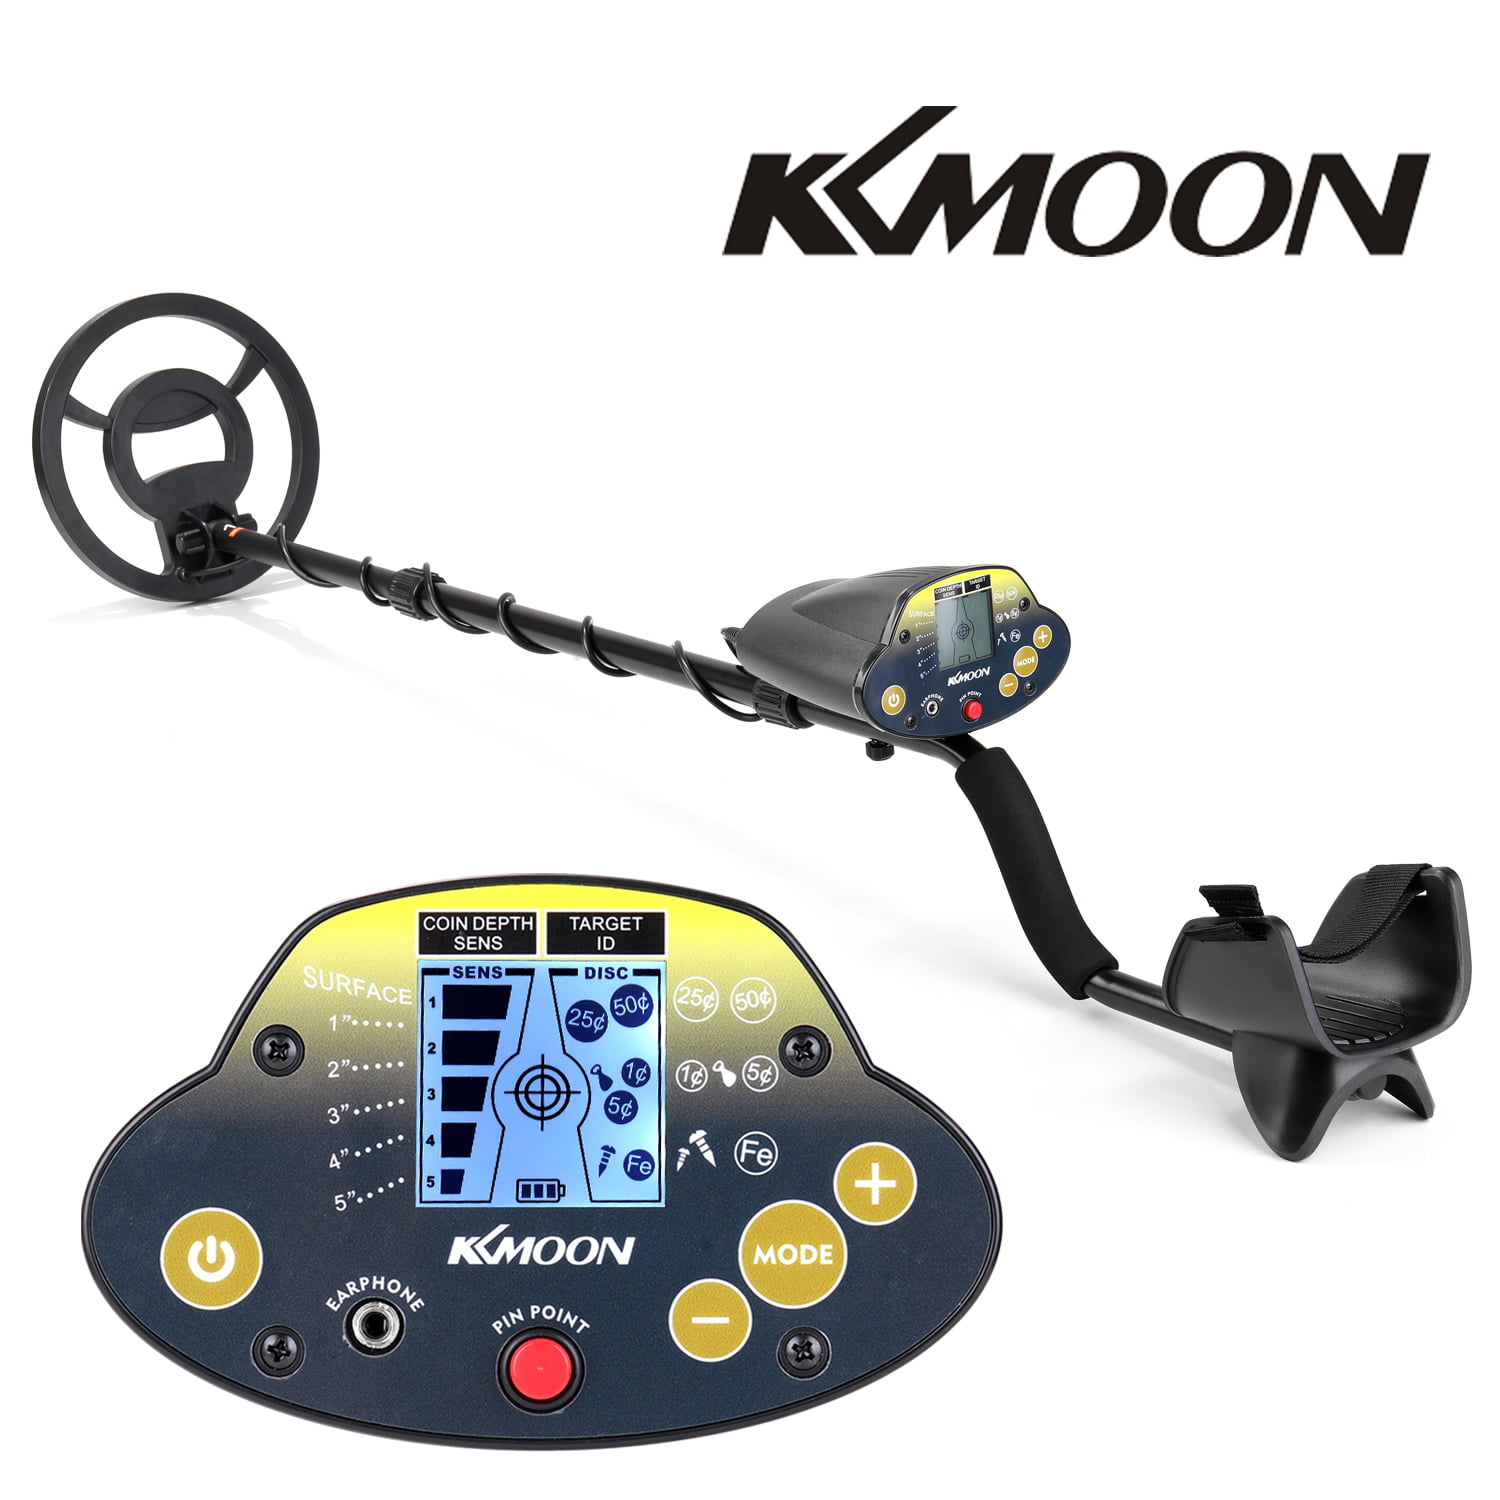 Underground Metal Detector KKmoon MD-5030KK Portable Easy Installation Metal Detecting for Adults High Sensitivity Jewelry Treasure Gold Tool Finder